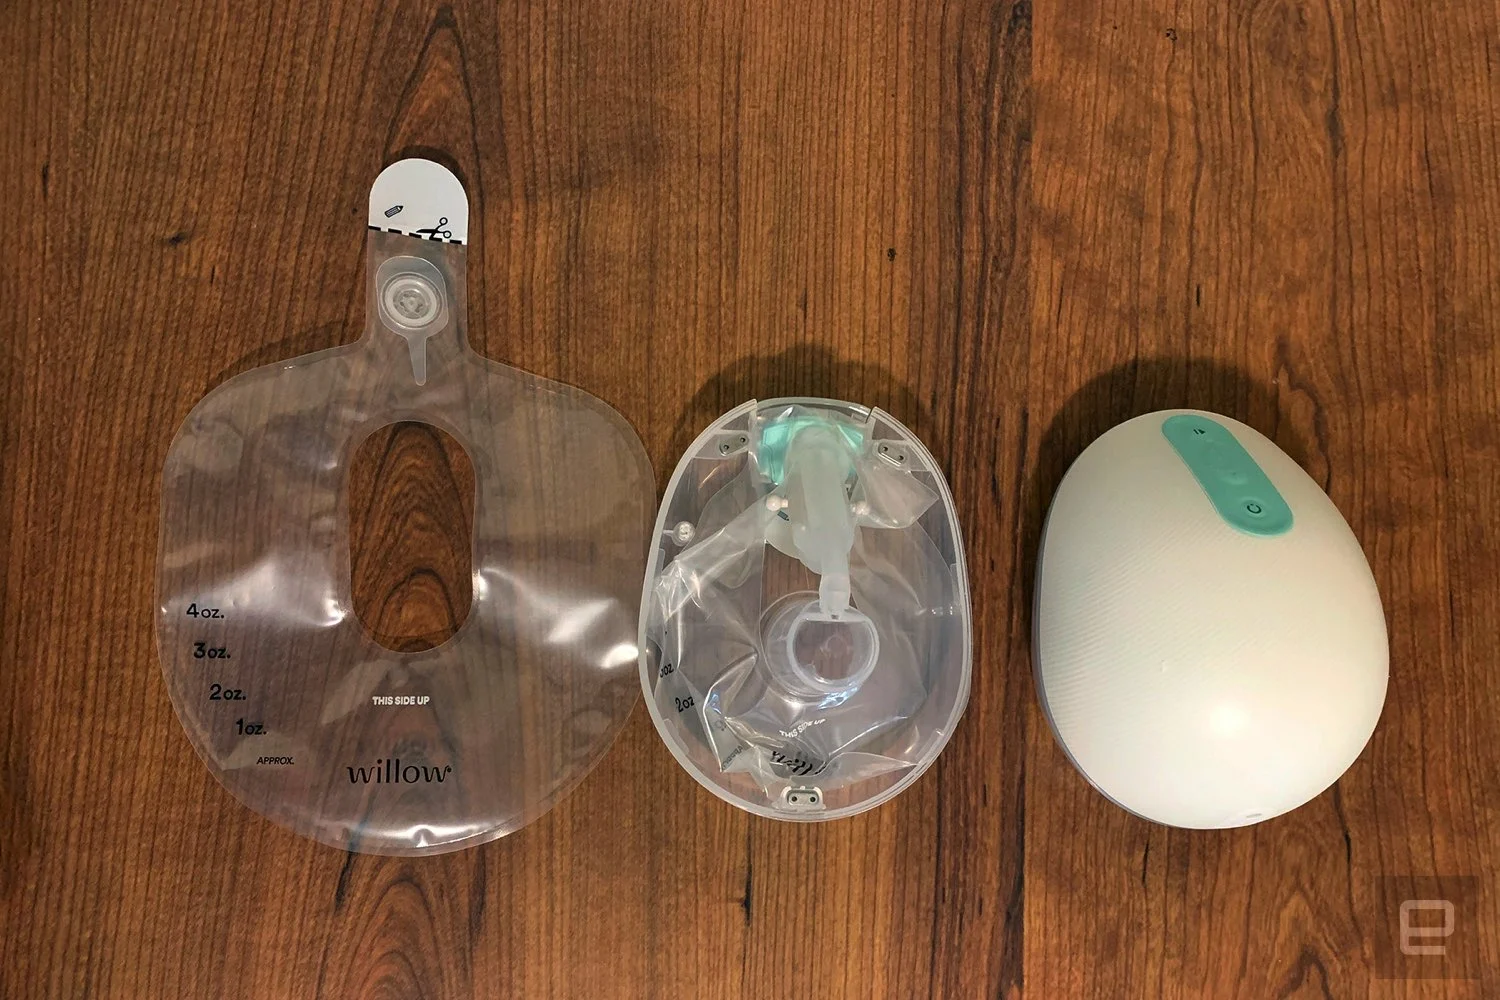 Willow 3.0 breast pump